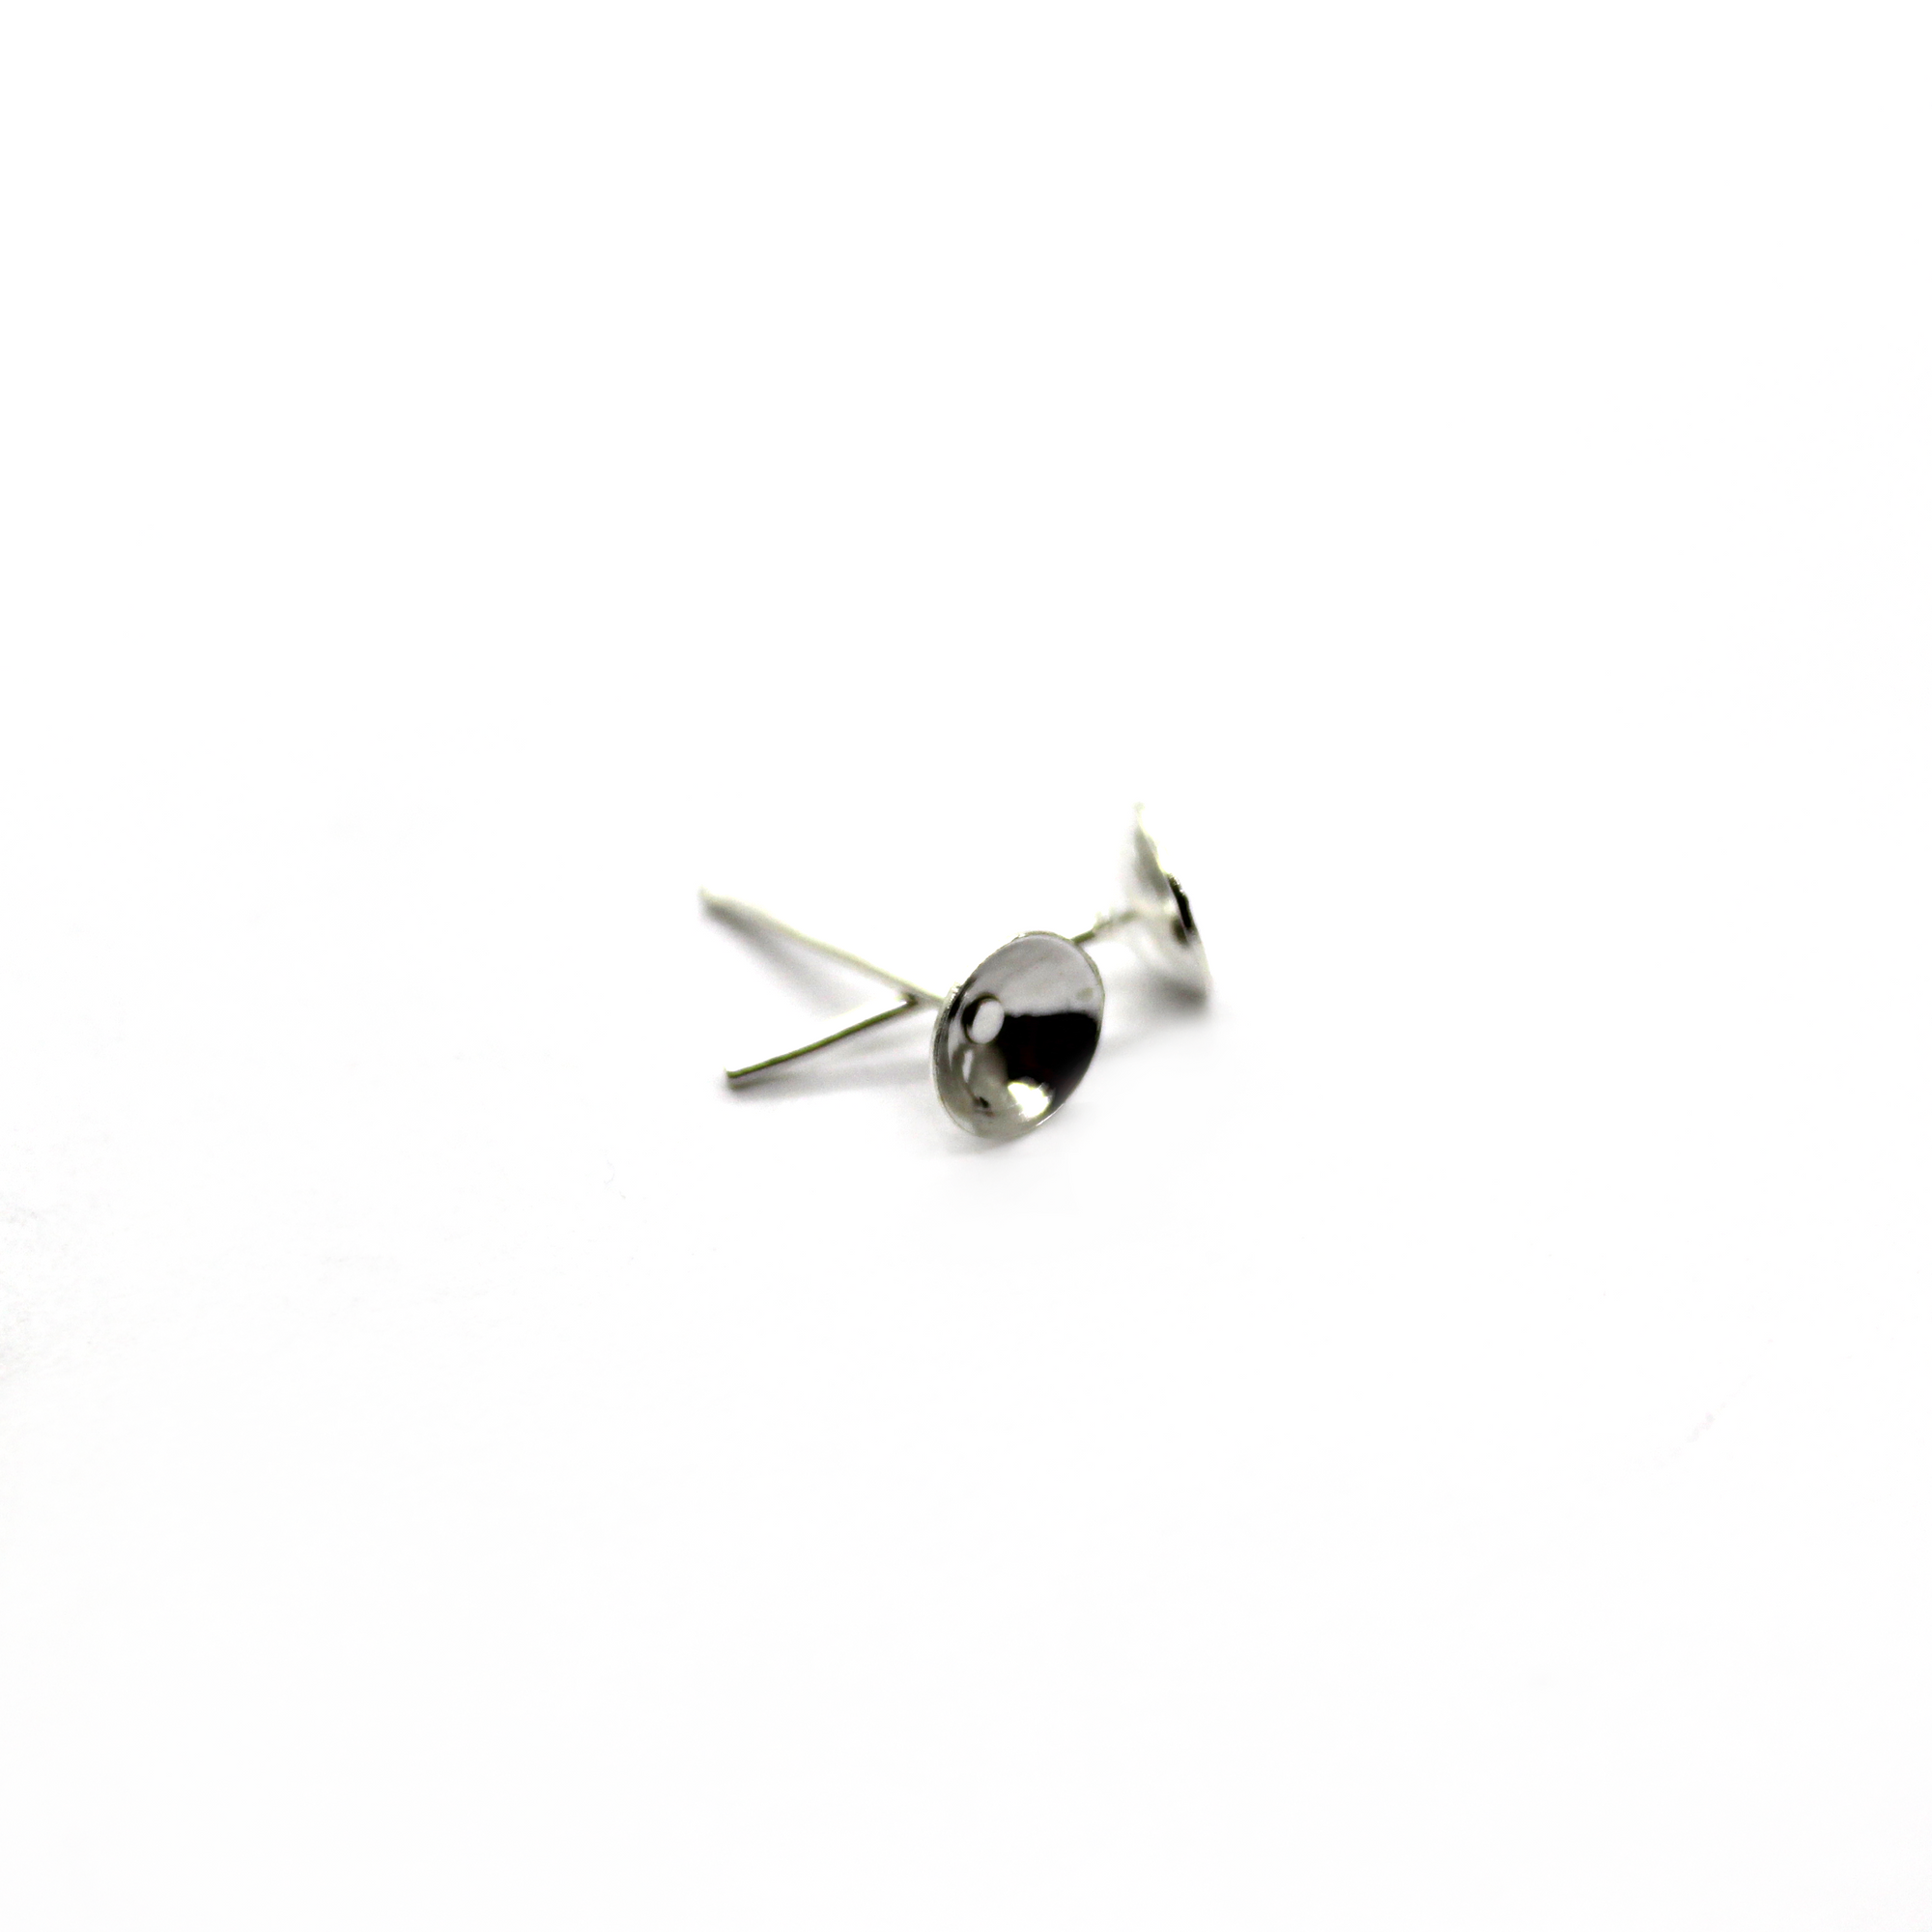 Earrings, Bright Silver, Alloy, Glue On Cup Stud, 13mm x 6mm, sold per pkg of 14 pairs